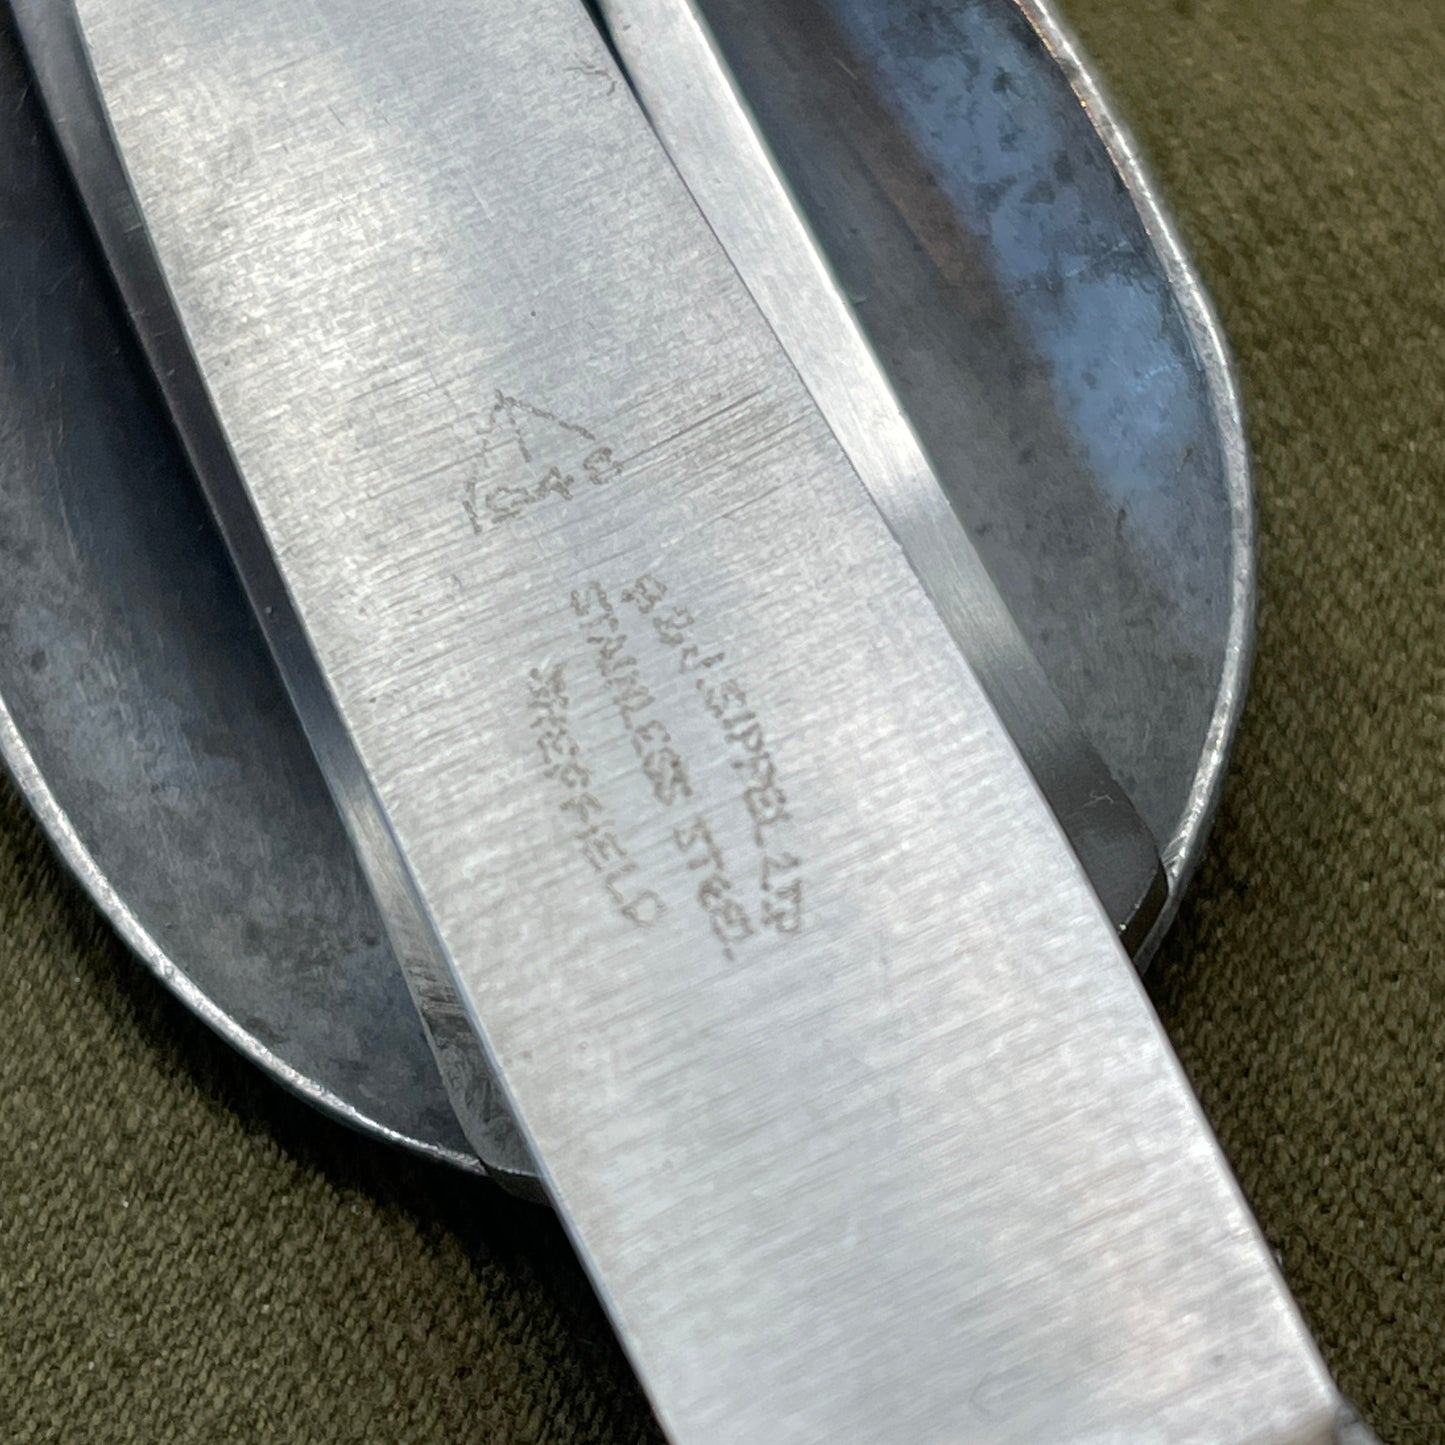  Knife, fork, and Spoon set dated 1945 Compactium